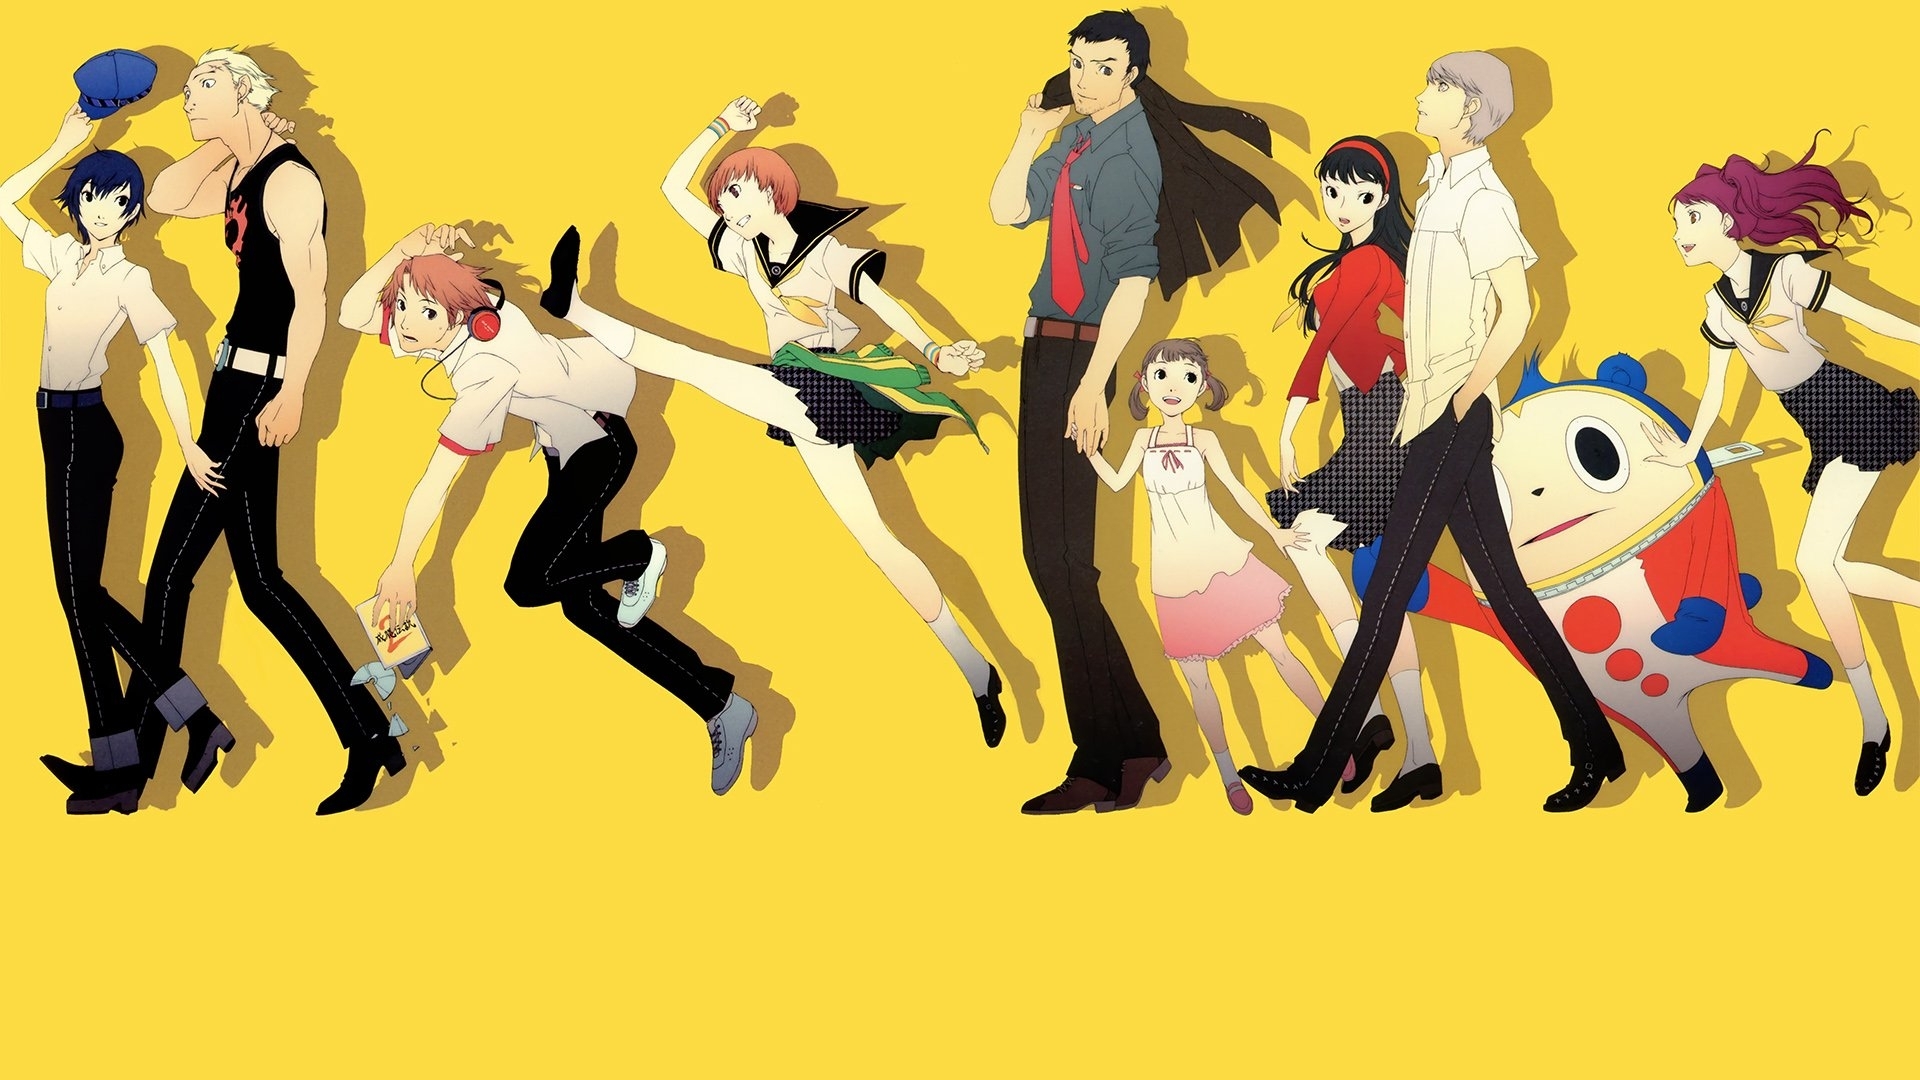 10 Latest Persona 4 Wallpaper Hd FULL HD 1080p For PC Background